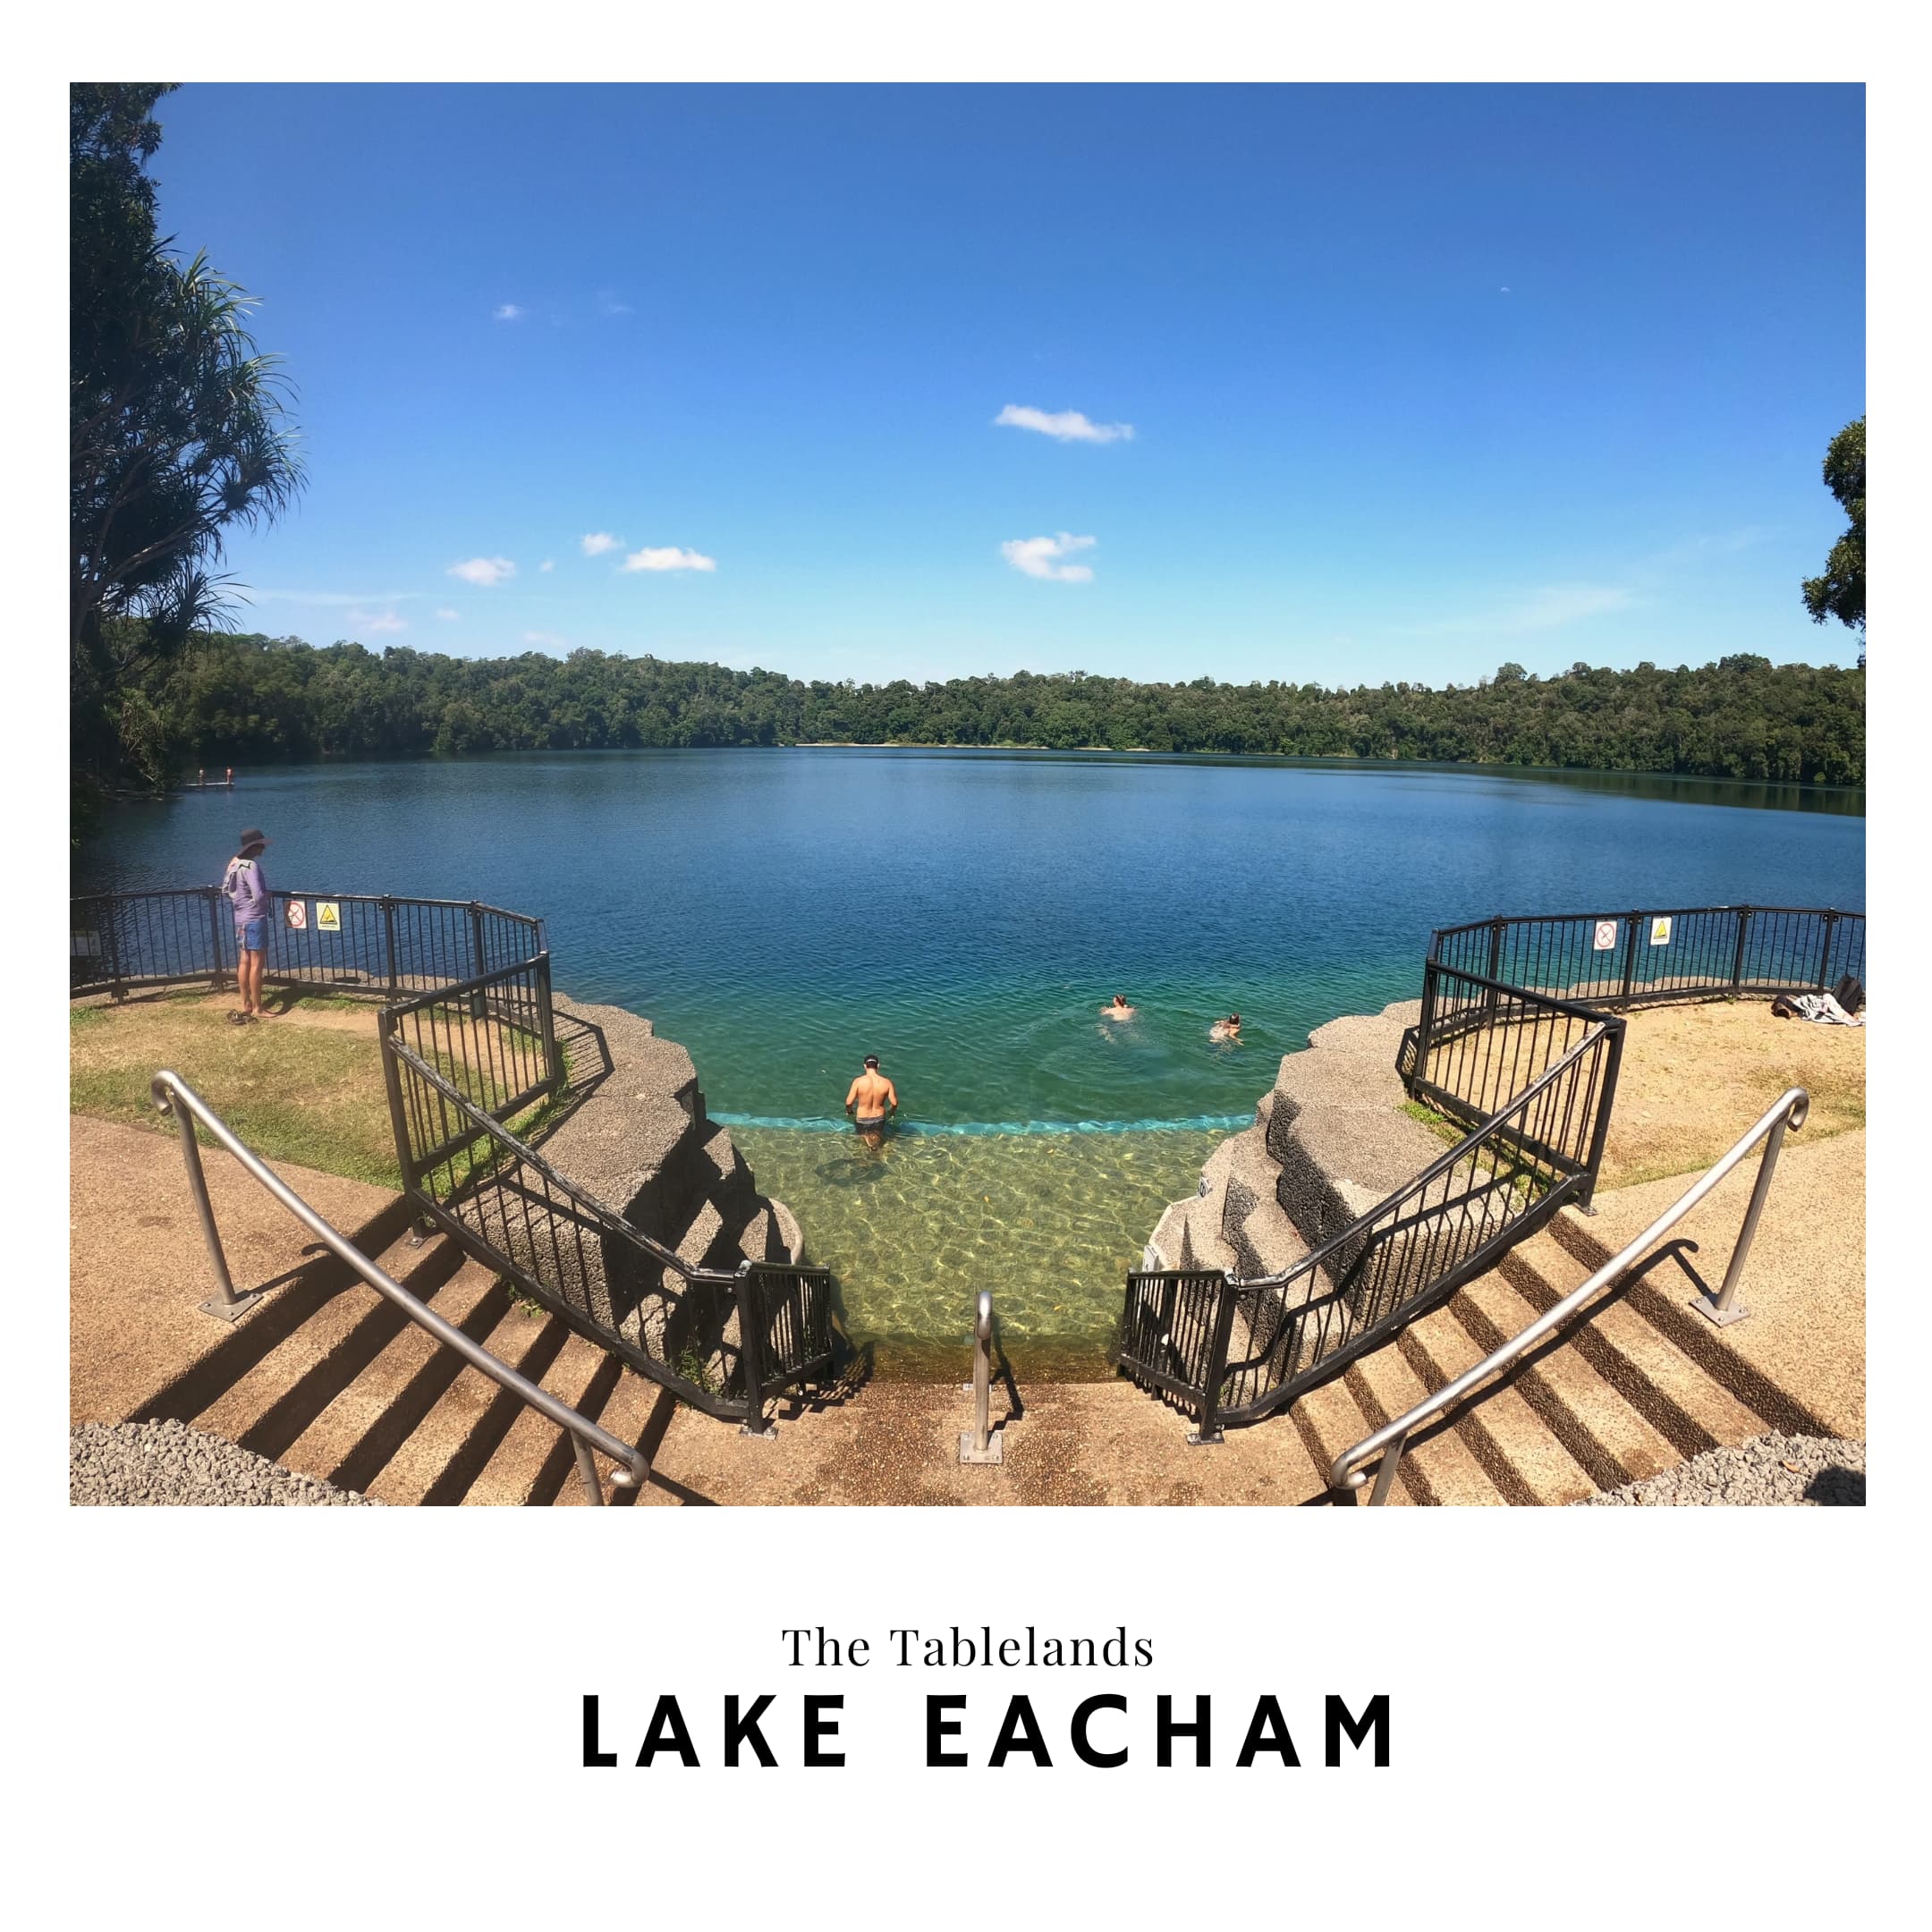 Link to the Lake Eacham Travel Guide in the tablelands australia